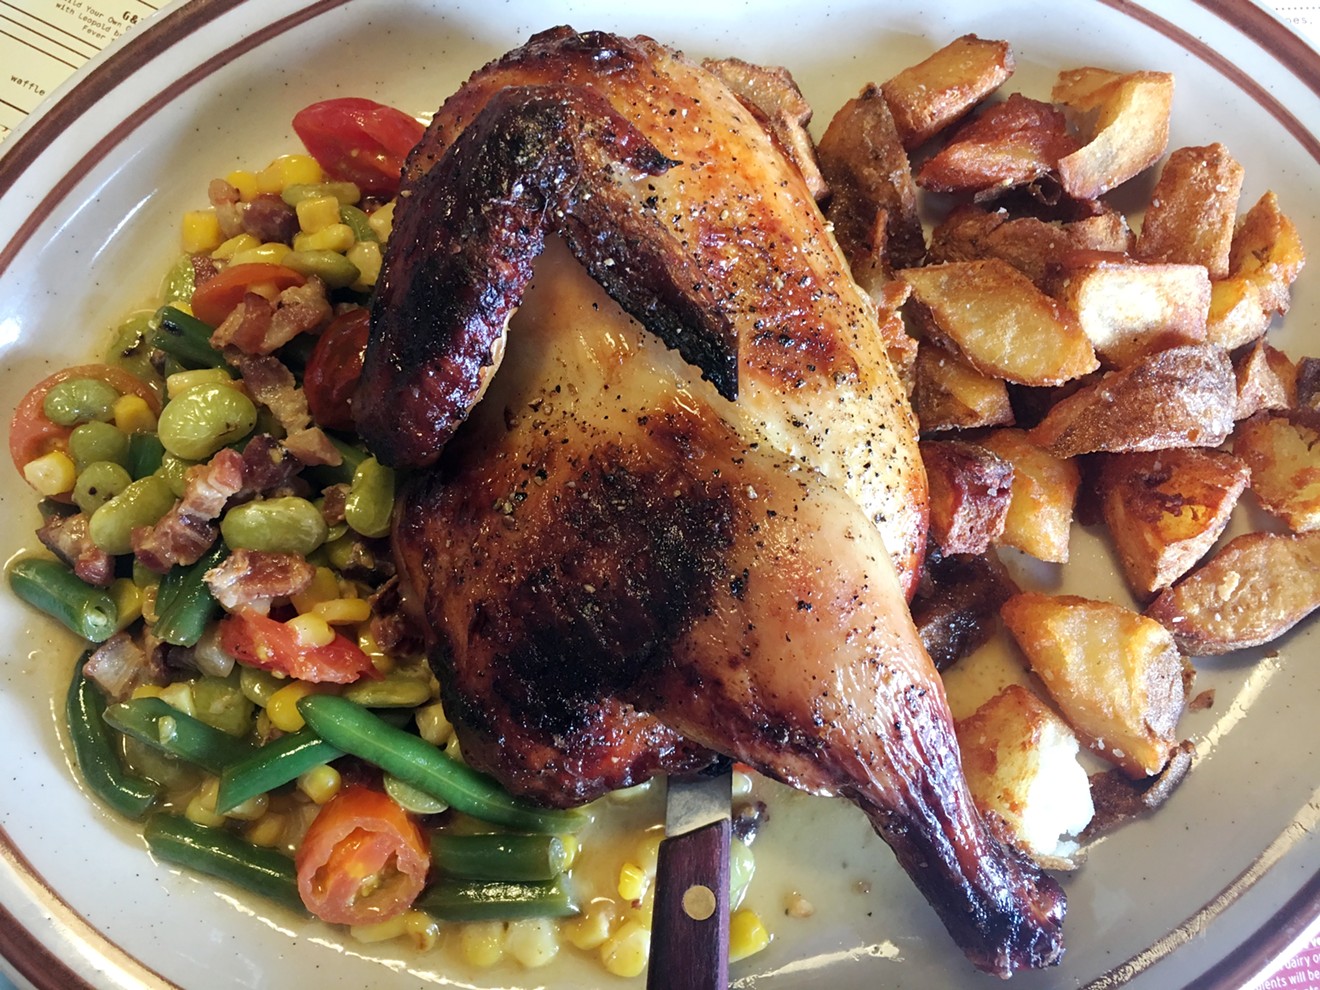 The new half brick chicken at Steuben's, served with crispy potatoes and succotash.